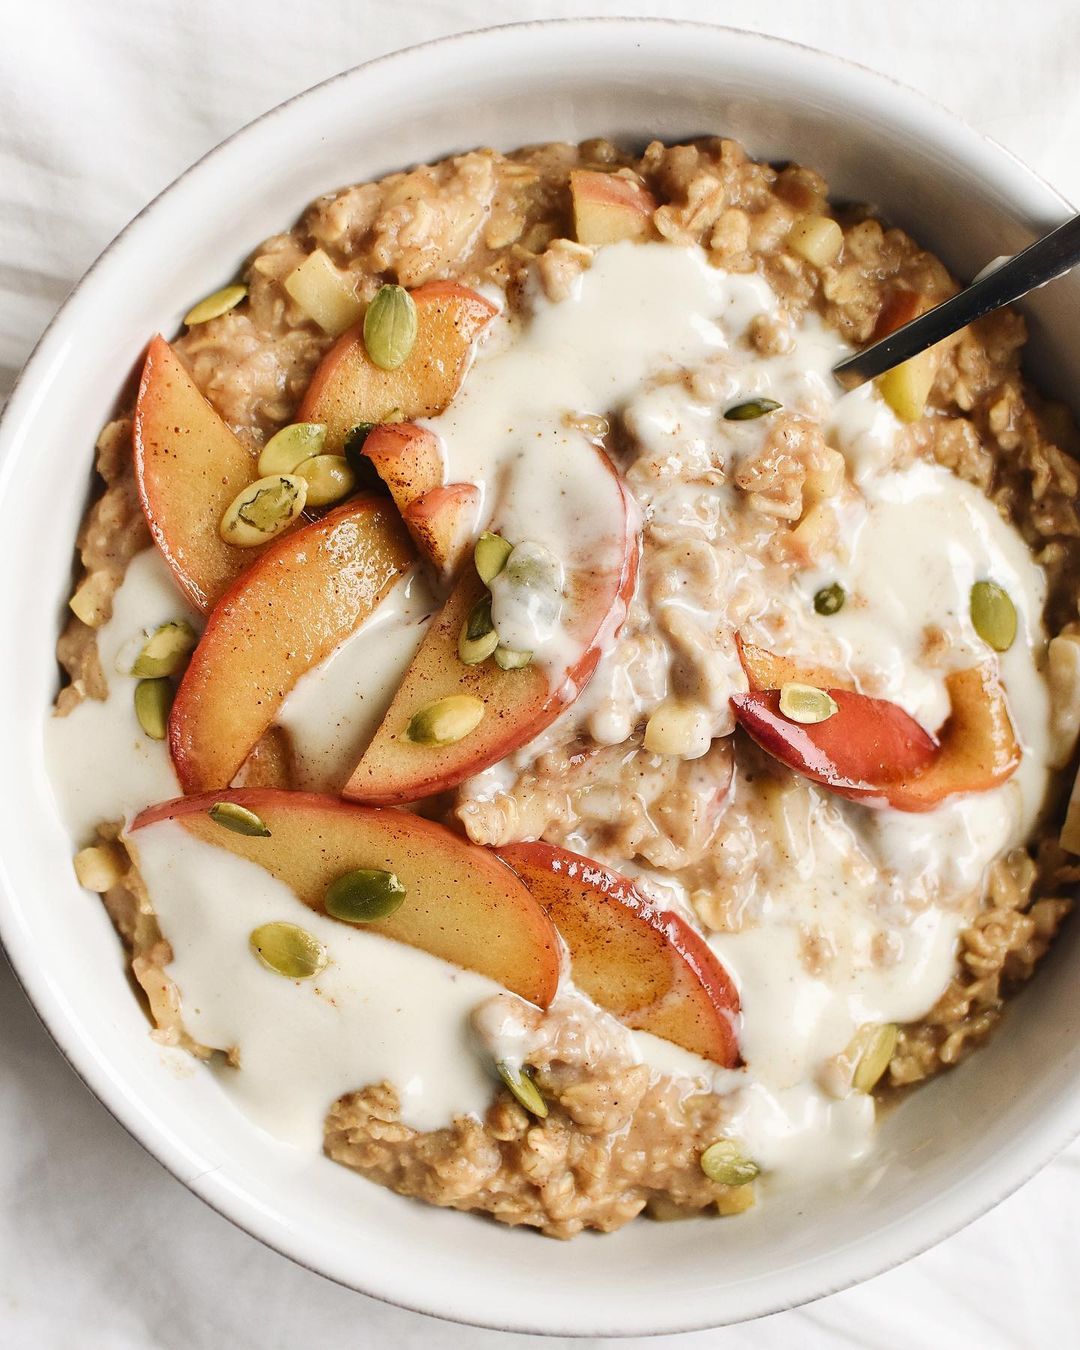 The Creamiest & Dreamiest Bowl of Oats